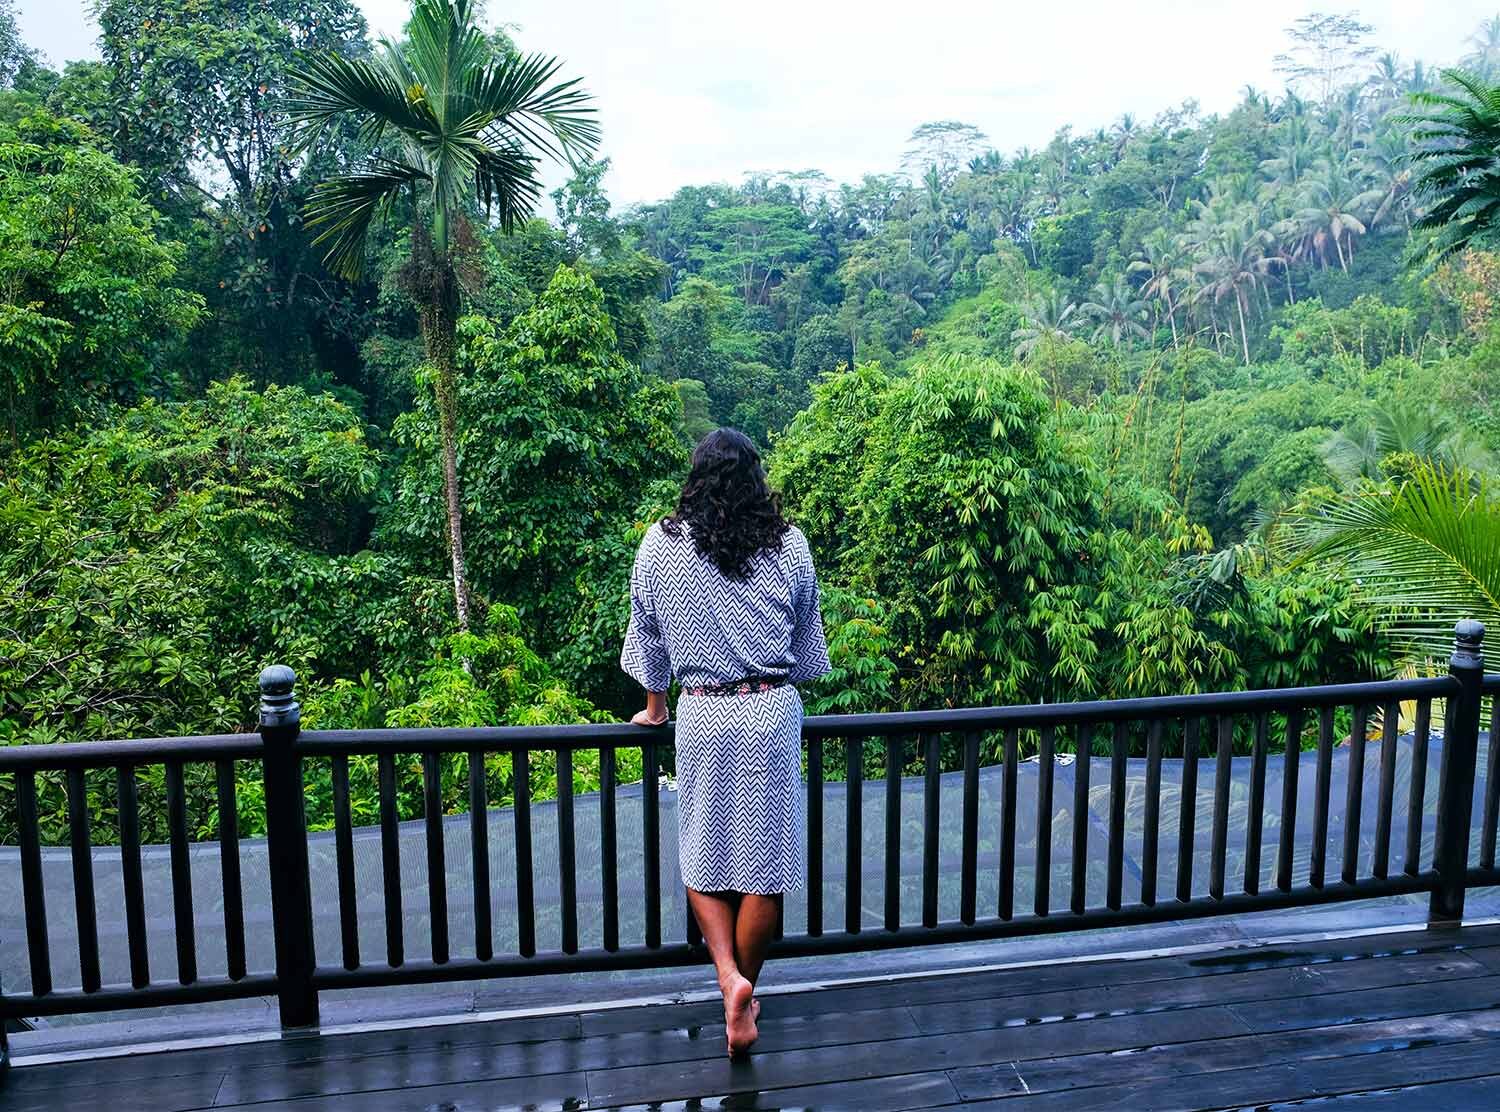 Capella Ubud The stay has come to an end. The only thing to do is stare into the jungle and reflect. I cried in front of all the staff upon checking out. What a feeling to leave with